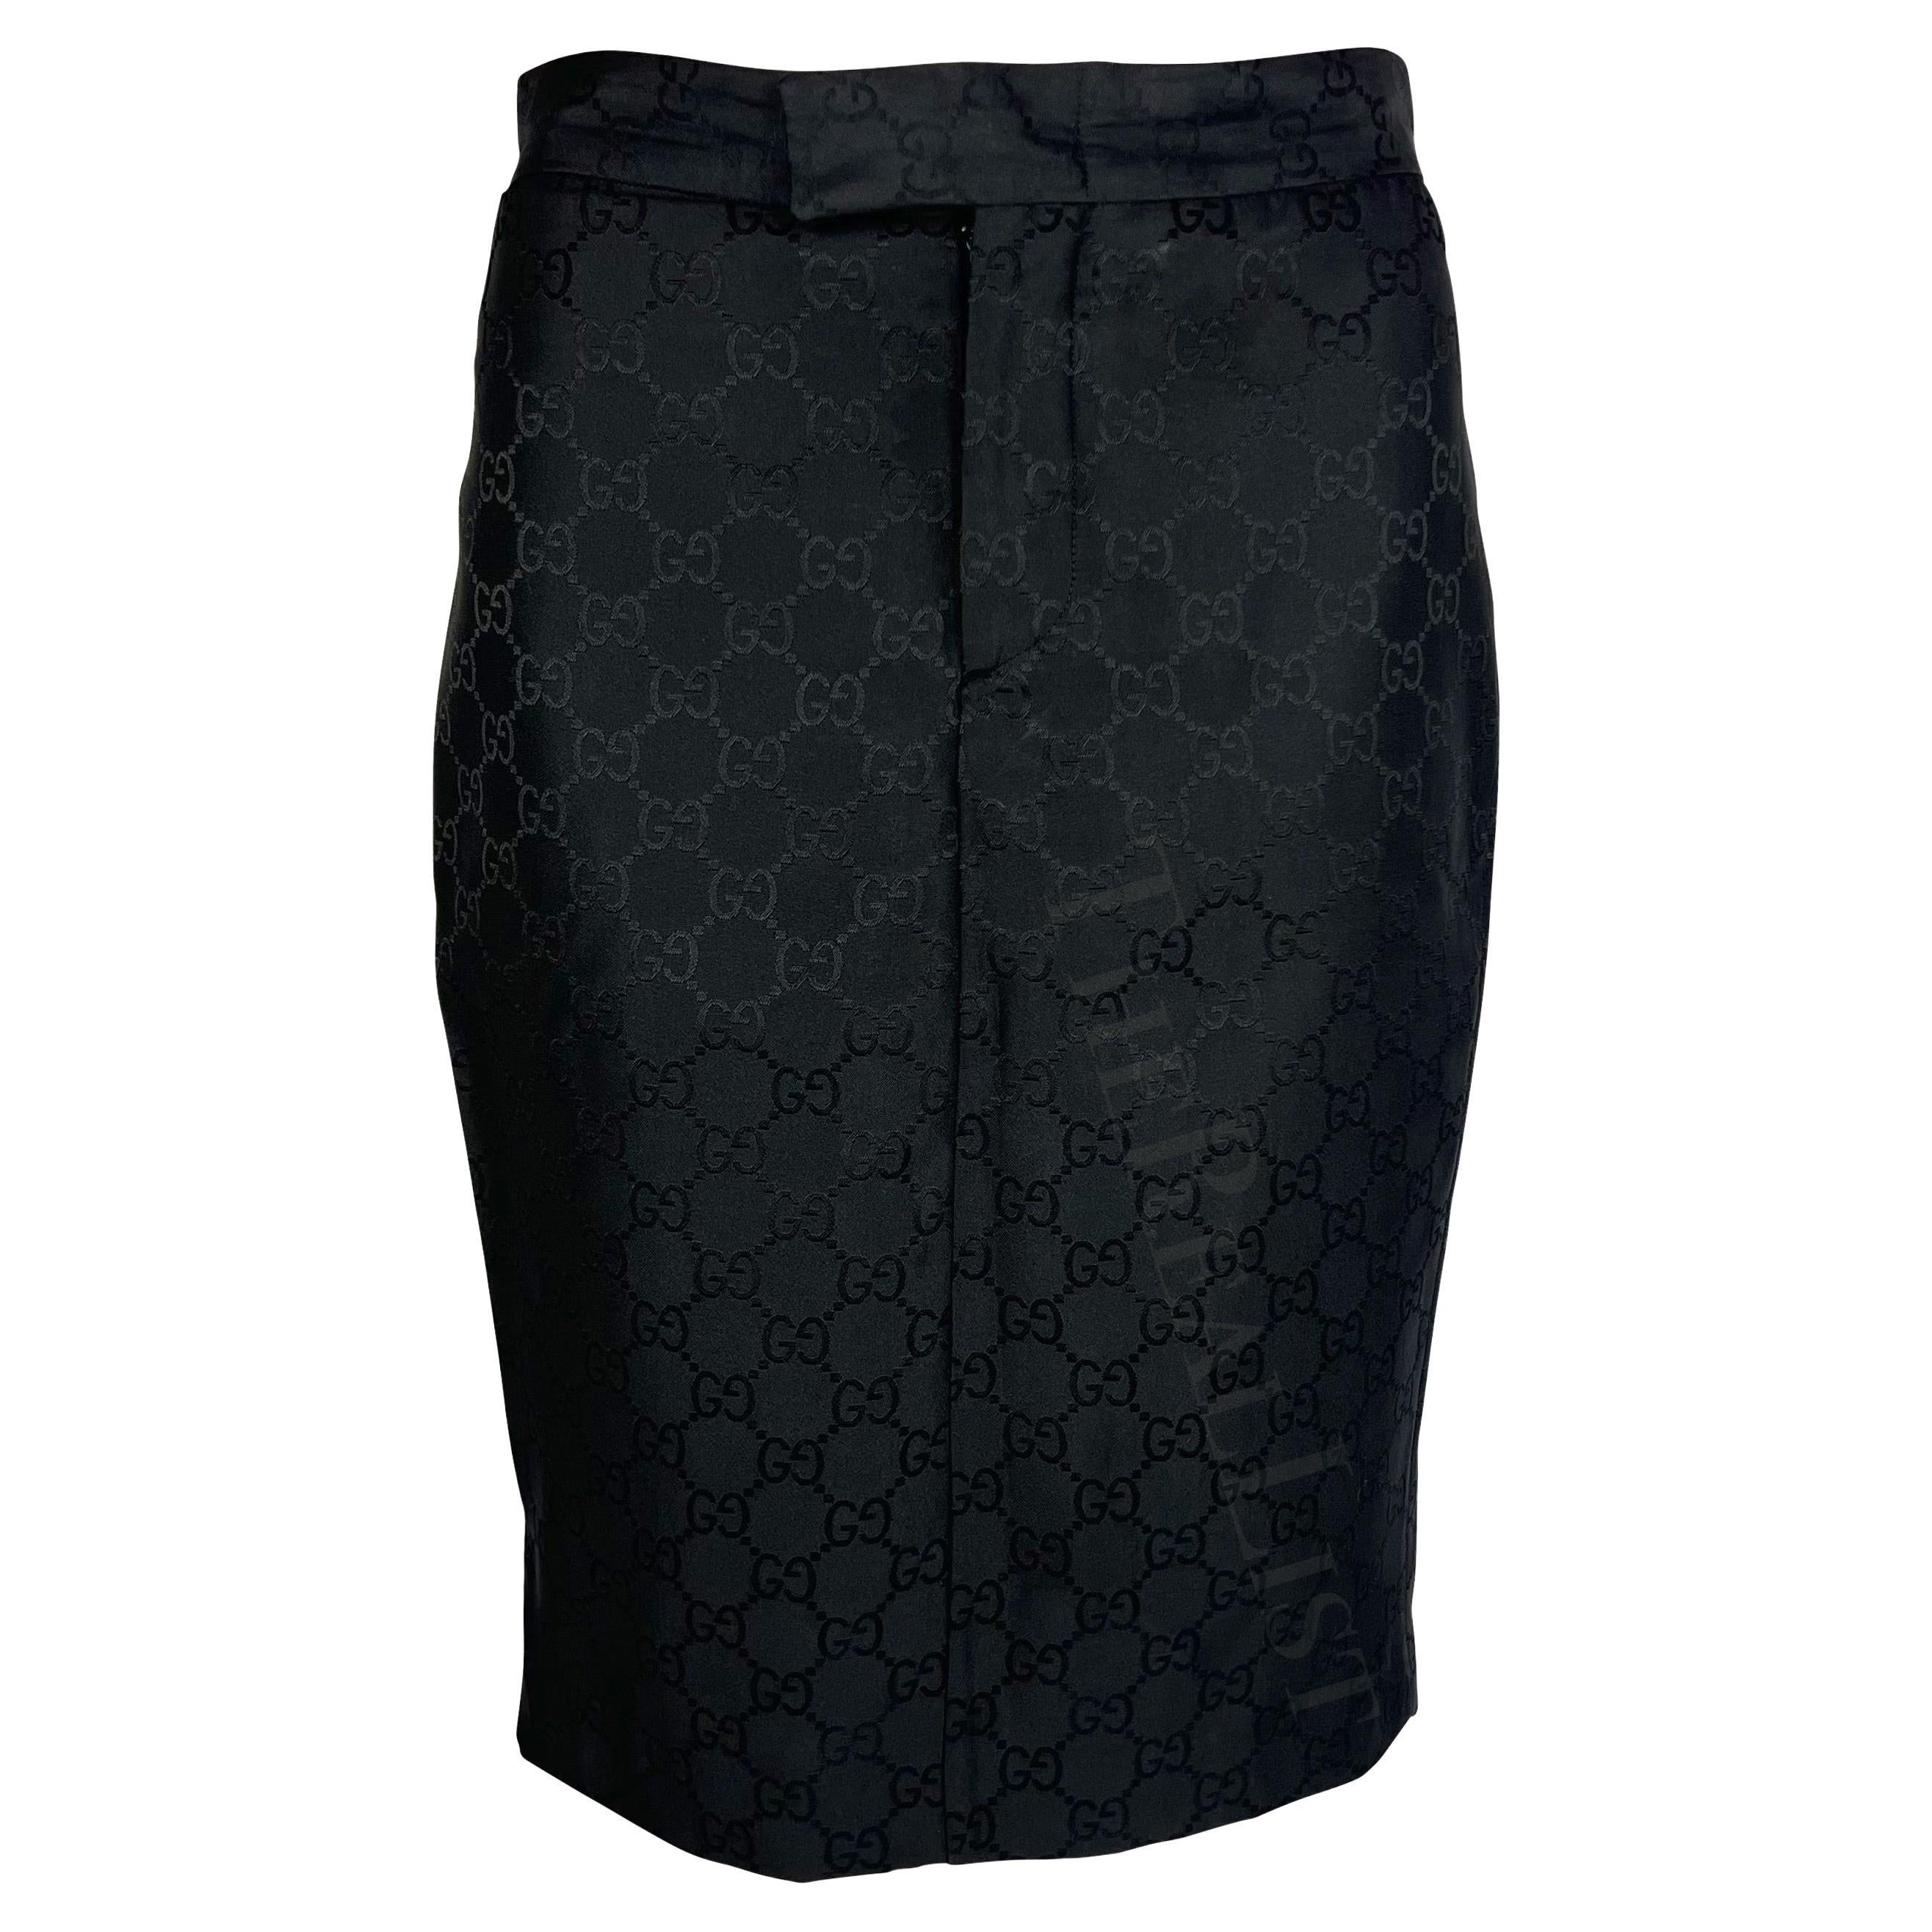 S/S 1998 Gucci by Tom Ford Black 'GG' Monogram Runway Skirt For Sale